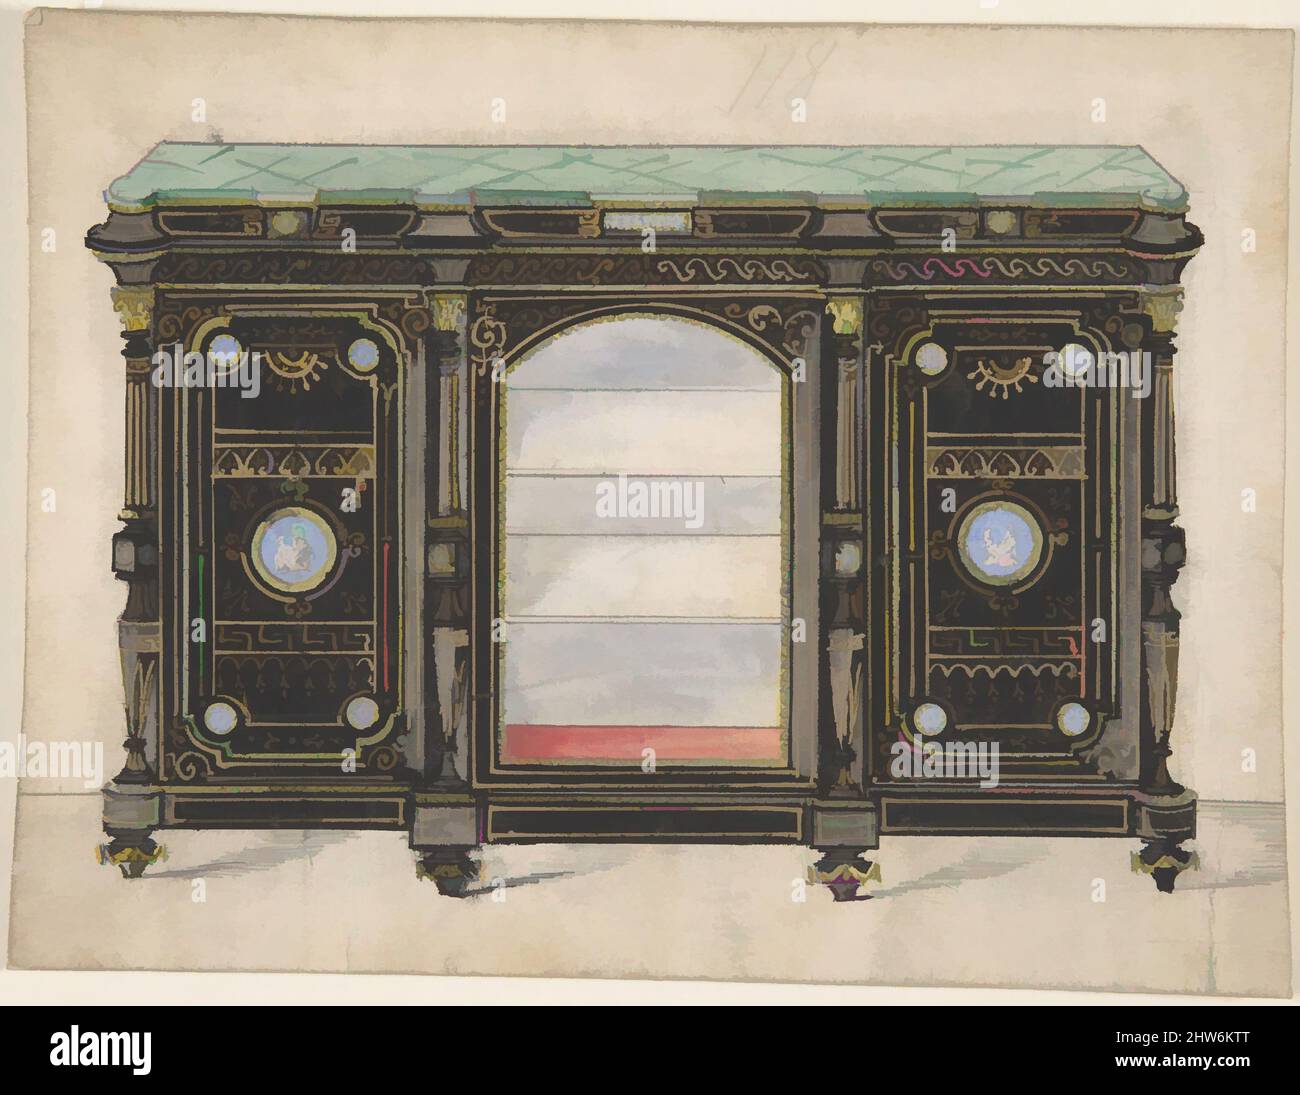 Art inspired by Cabinet Design with Glass Front, its Doors Adorned with Porcelain Plaques, with a Green Top, 19th century, Ink and watercolor, sheet: 5 5/16 x 6 15/16 in. (13.5 x 17.7 cm), Anonymous, British, 19th century, Classic works modernized by Artotop with a splash of modernity. Shapes, color and value, eye-catching visual impact on art. Emotions through freedom of artworks in a contemporary way. A timeless message pursuing a wildly creative new direction. Artists turning to the digital medium and creating the Artotop NFT Stock Photo